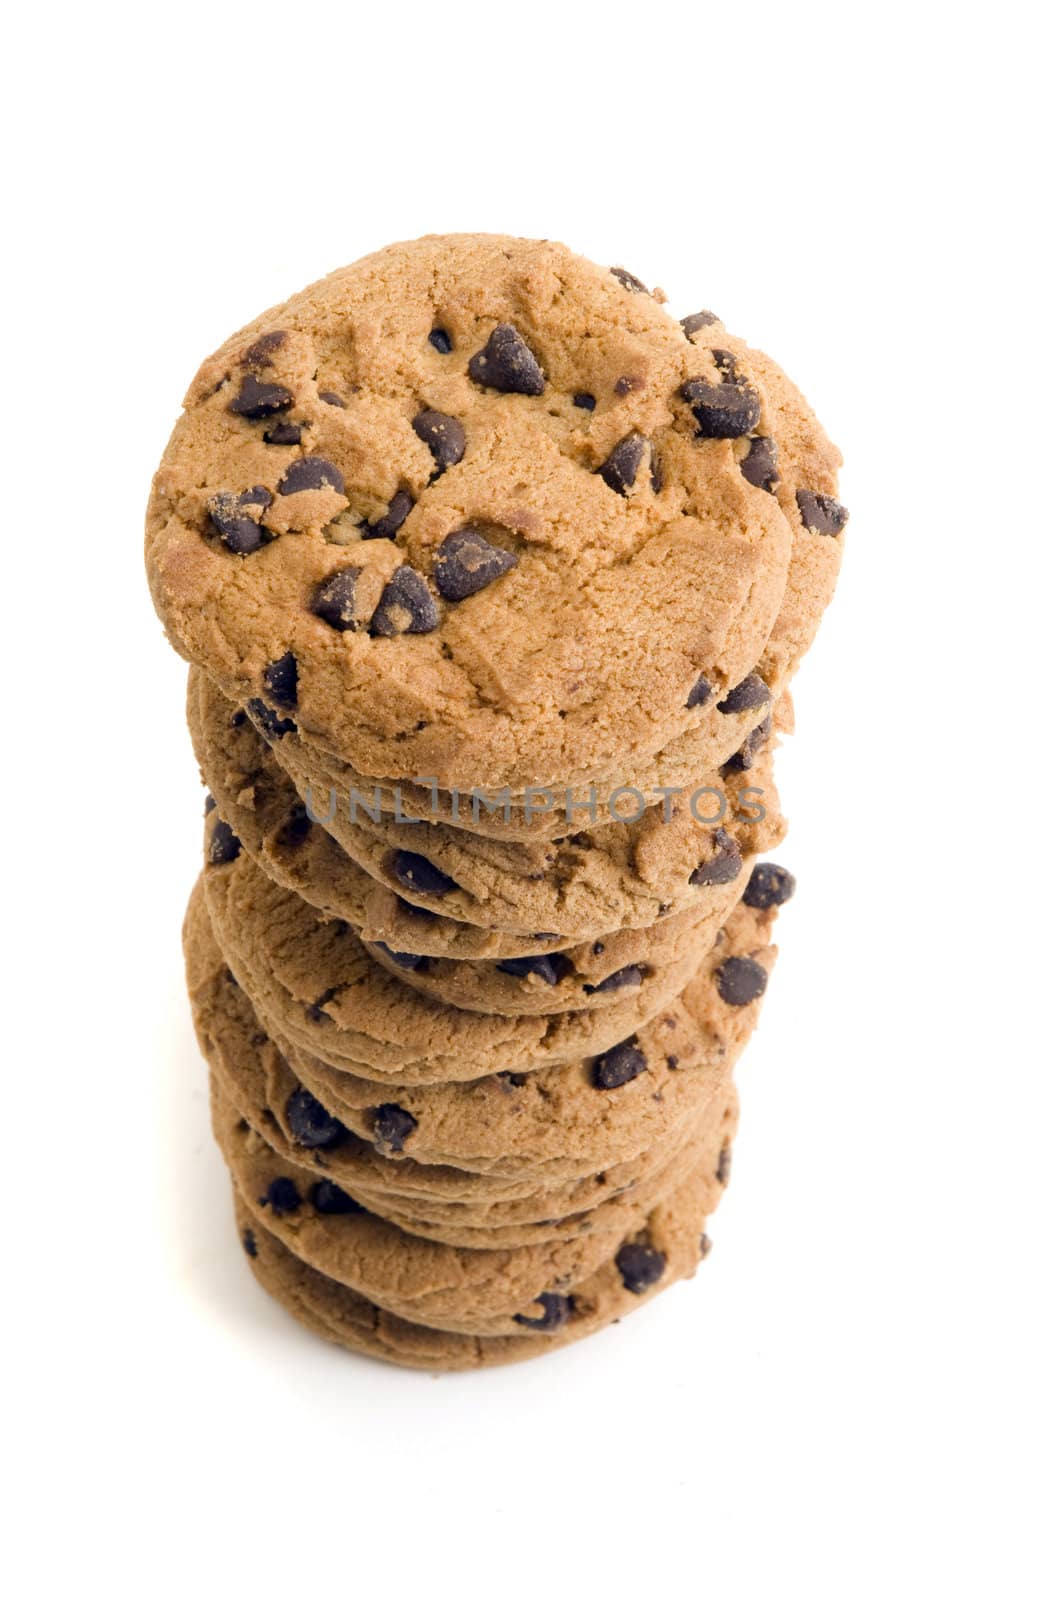 Wide angle image with selective focus on the top cookie of the stack